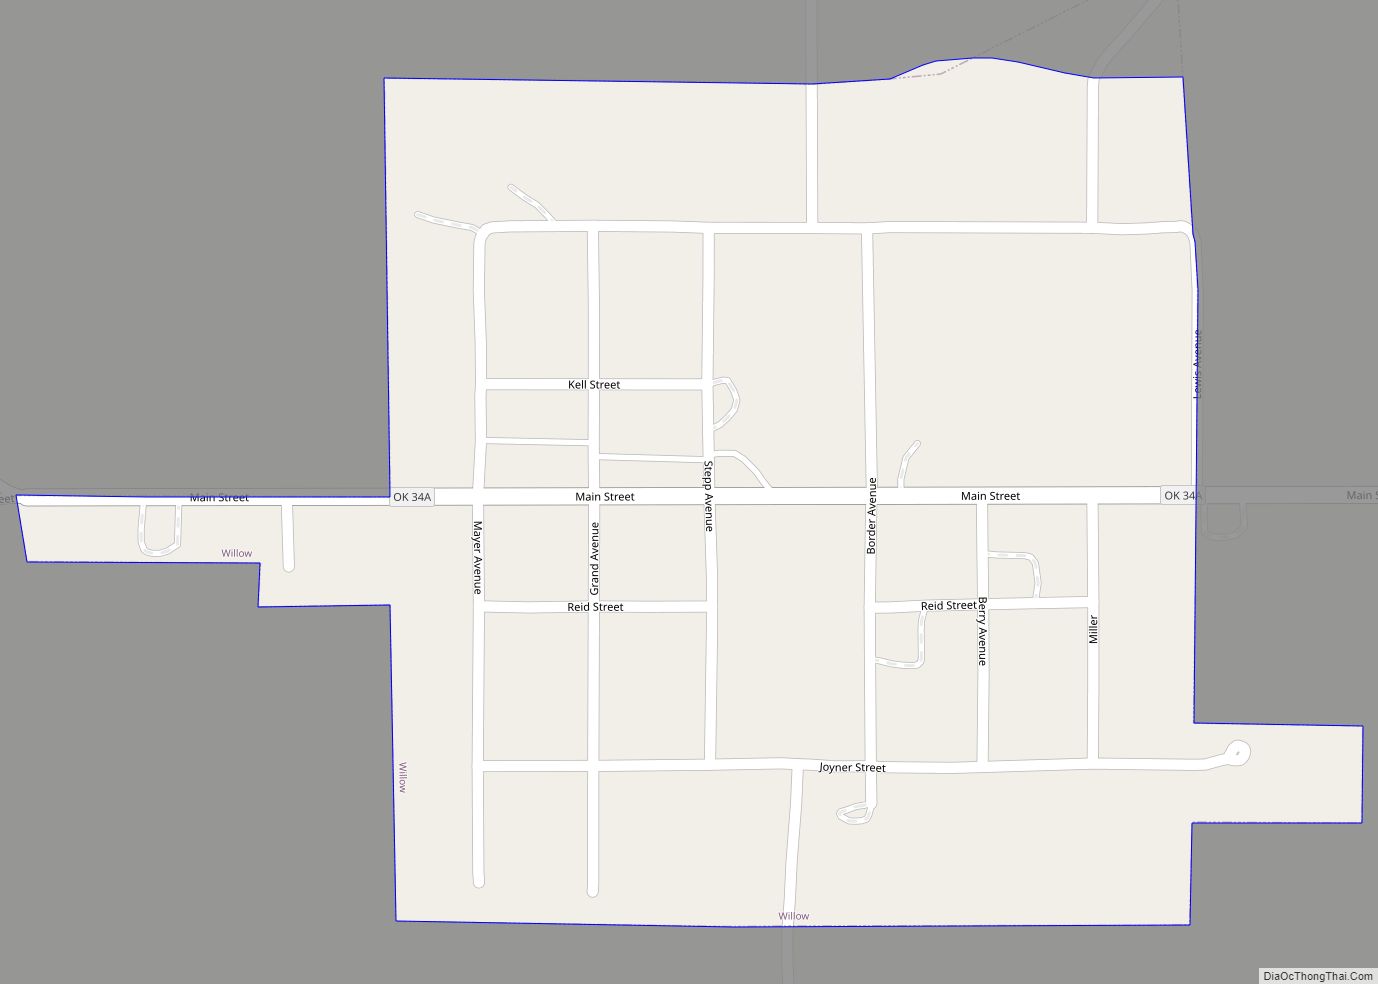 Map of Willow town, Oklahoma